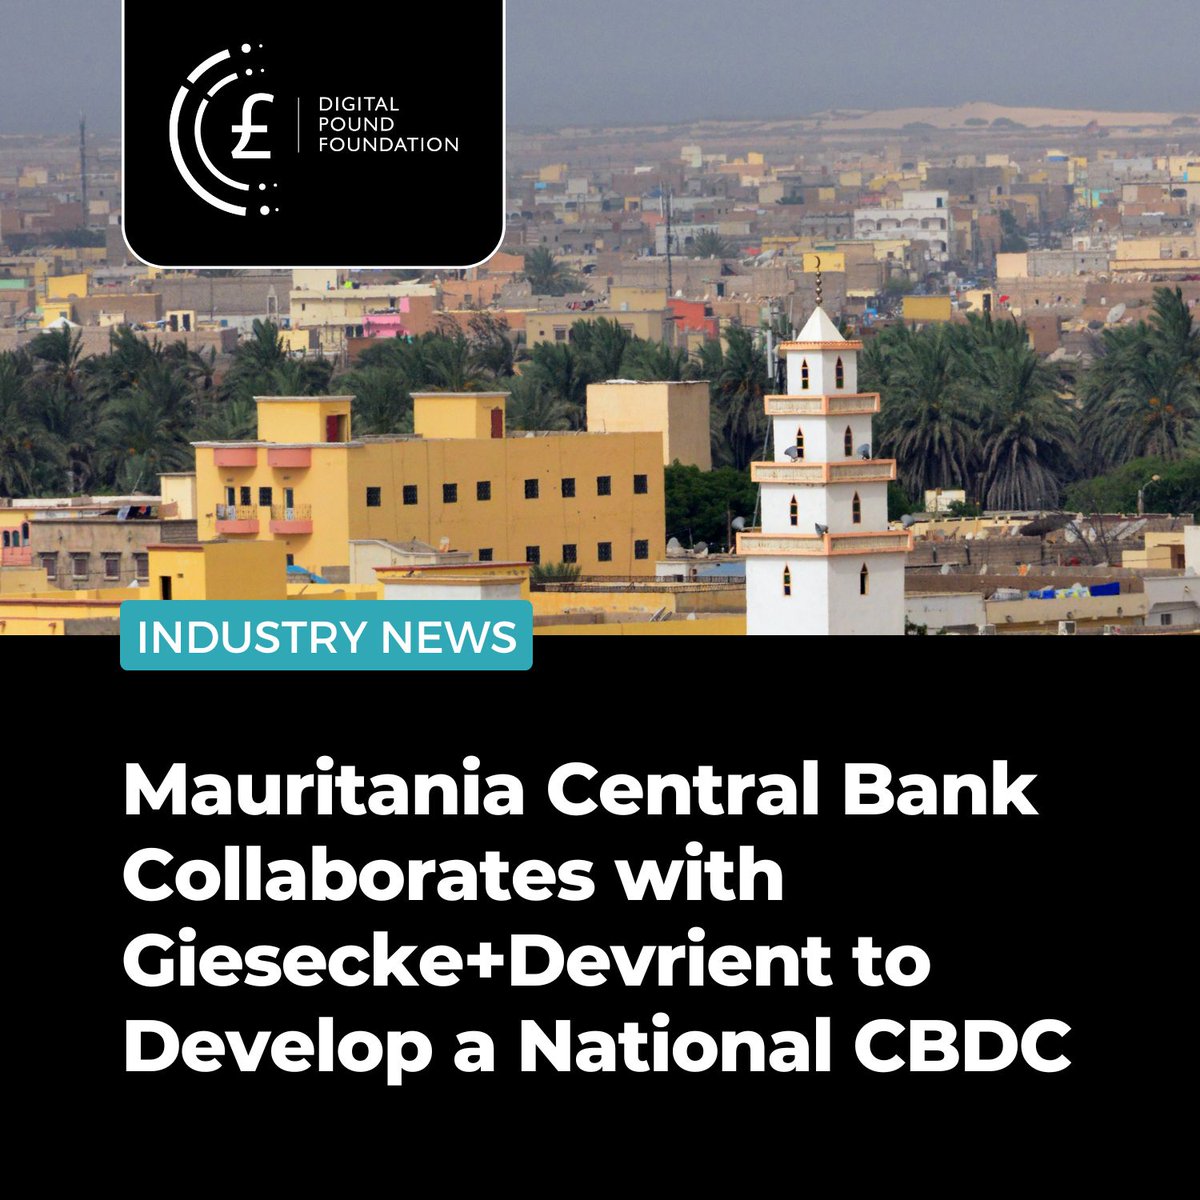 The #CentralBank of #Mauritania has partnered with the security technology company Giesecke+Devrient (G+D) to create and launch a central bank digital currency 👉 buff.ly/3xZKbmt ... #Africa #DigitalCurrency #CBDC #Fintech